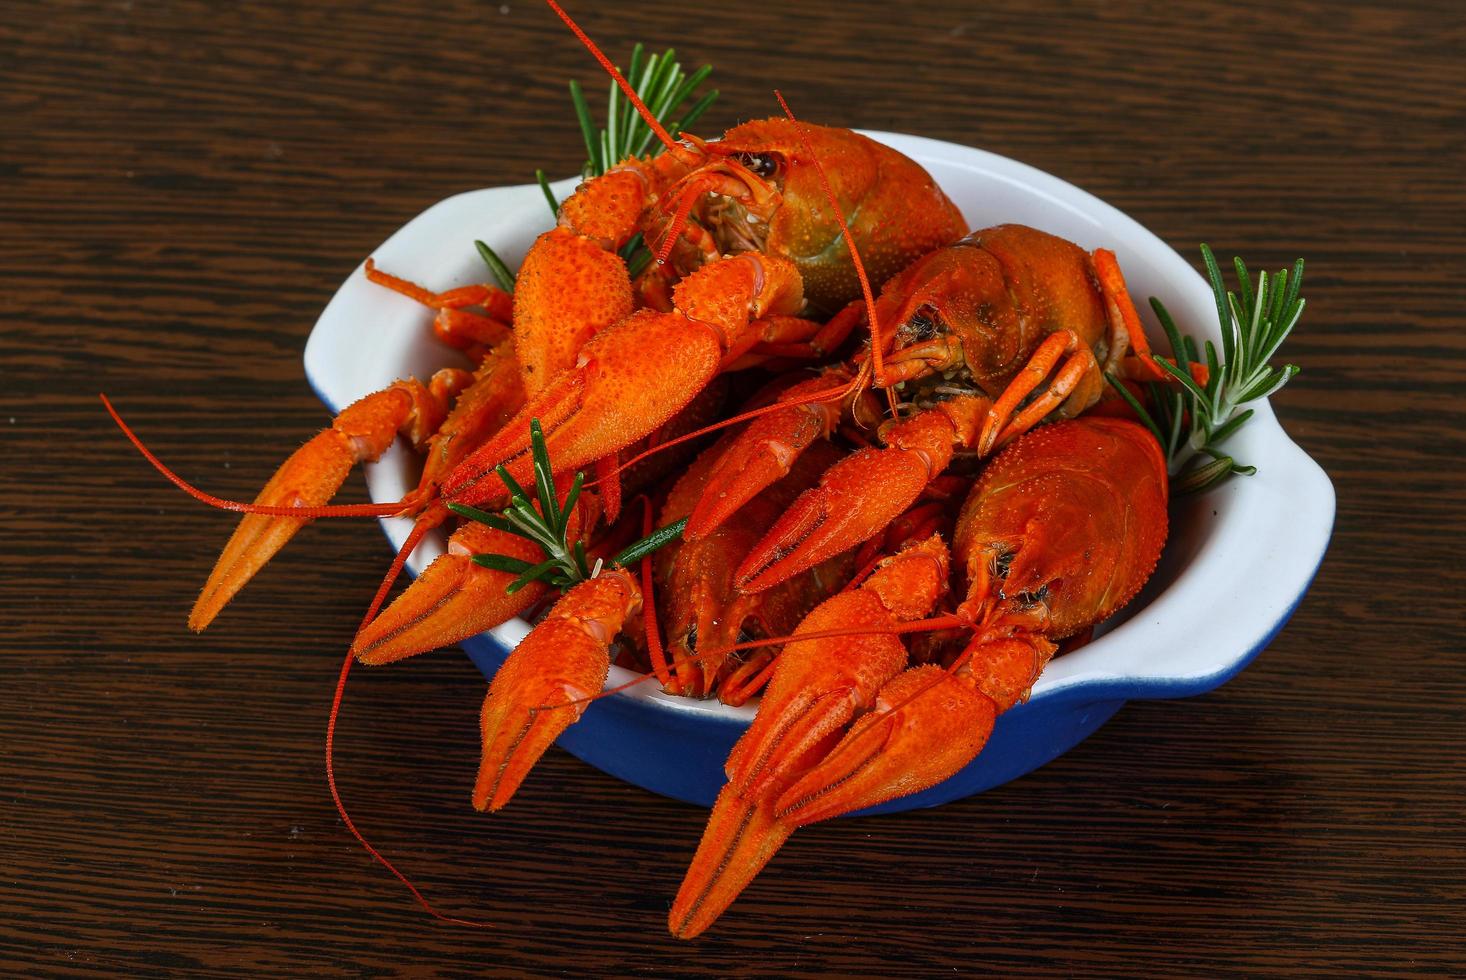 Crayfish in a bowl on wooden background photo